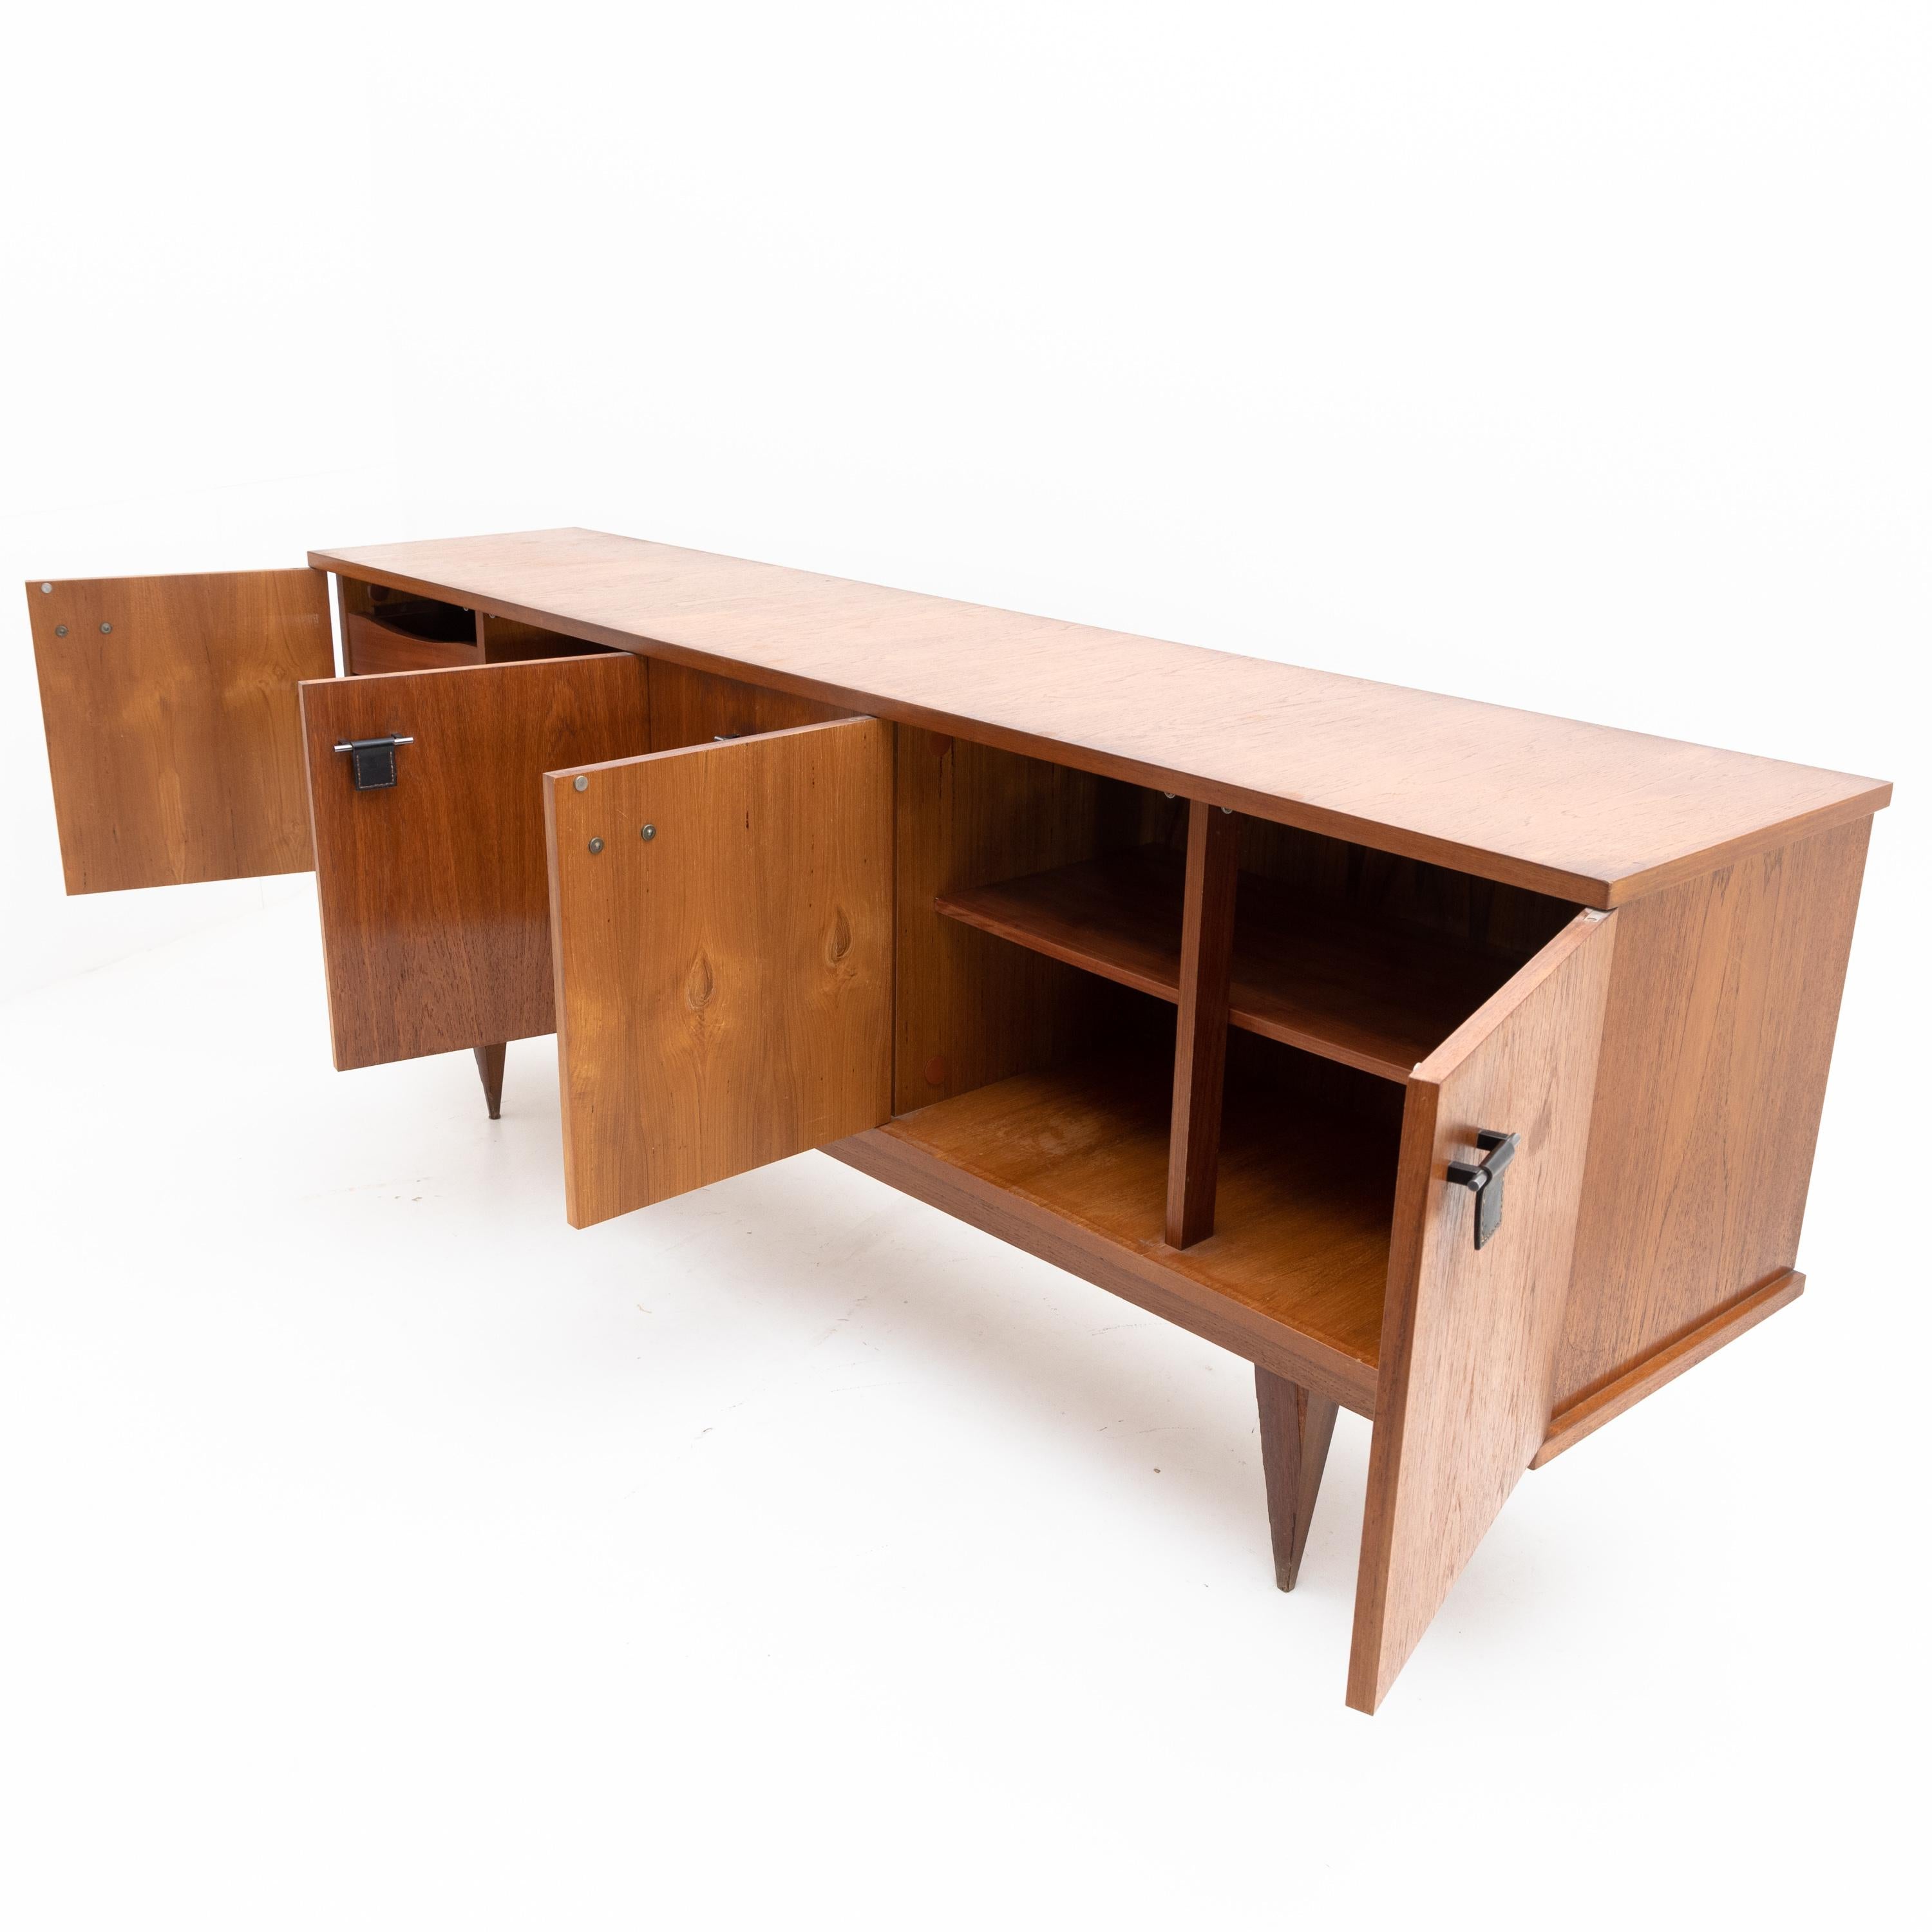 Mid-Century Modern Sideboard, Malora / Ameublement NF, France, 1960s